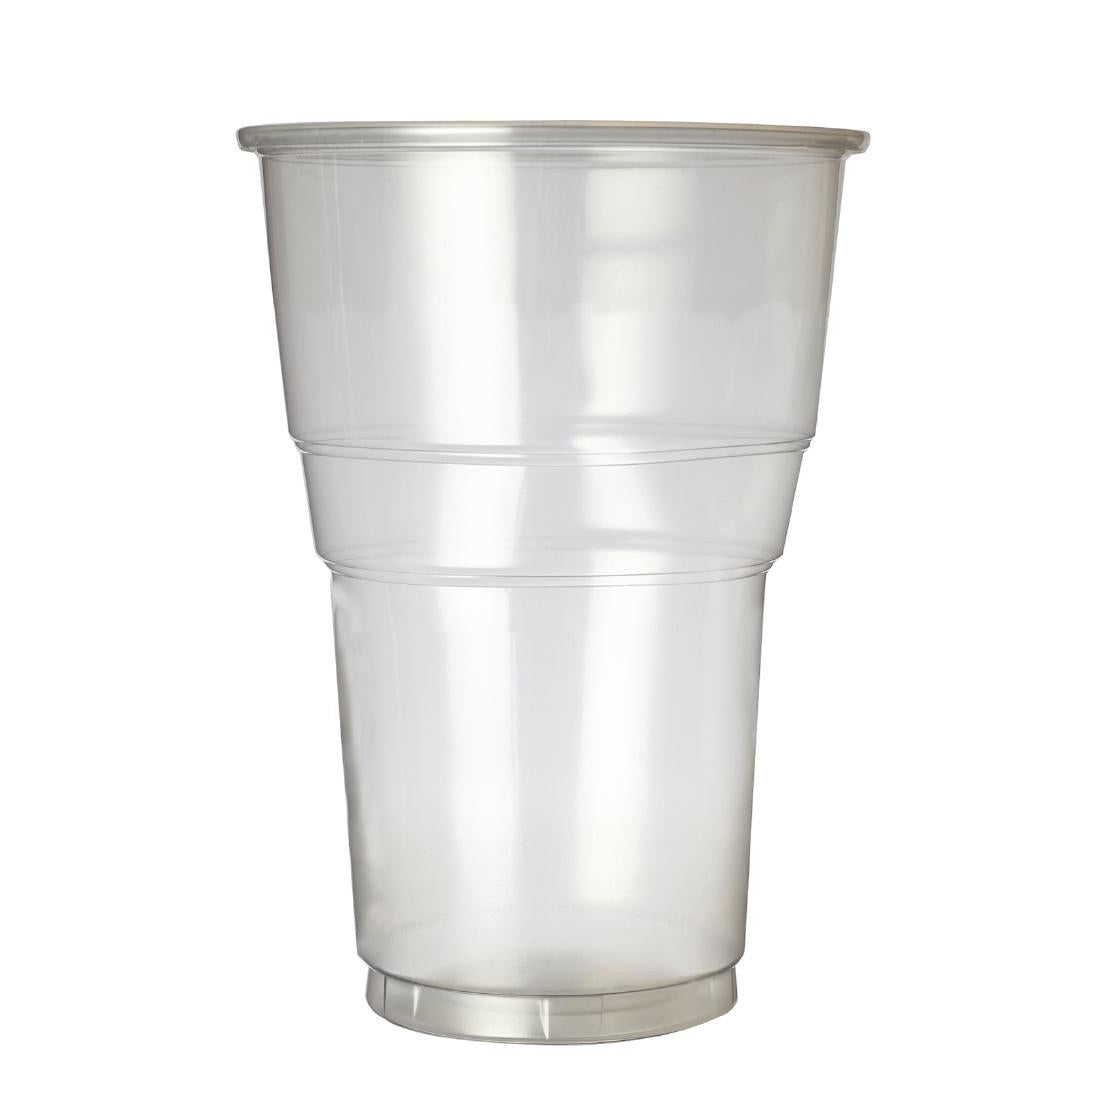 CP891 eGreen Premium Flexy-Glass Recyclable Pint To Brim CE Marked 568ml / 20oz (Pack of 1000) JD Catering Equipment Solutions Ltd